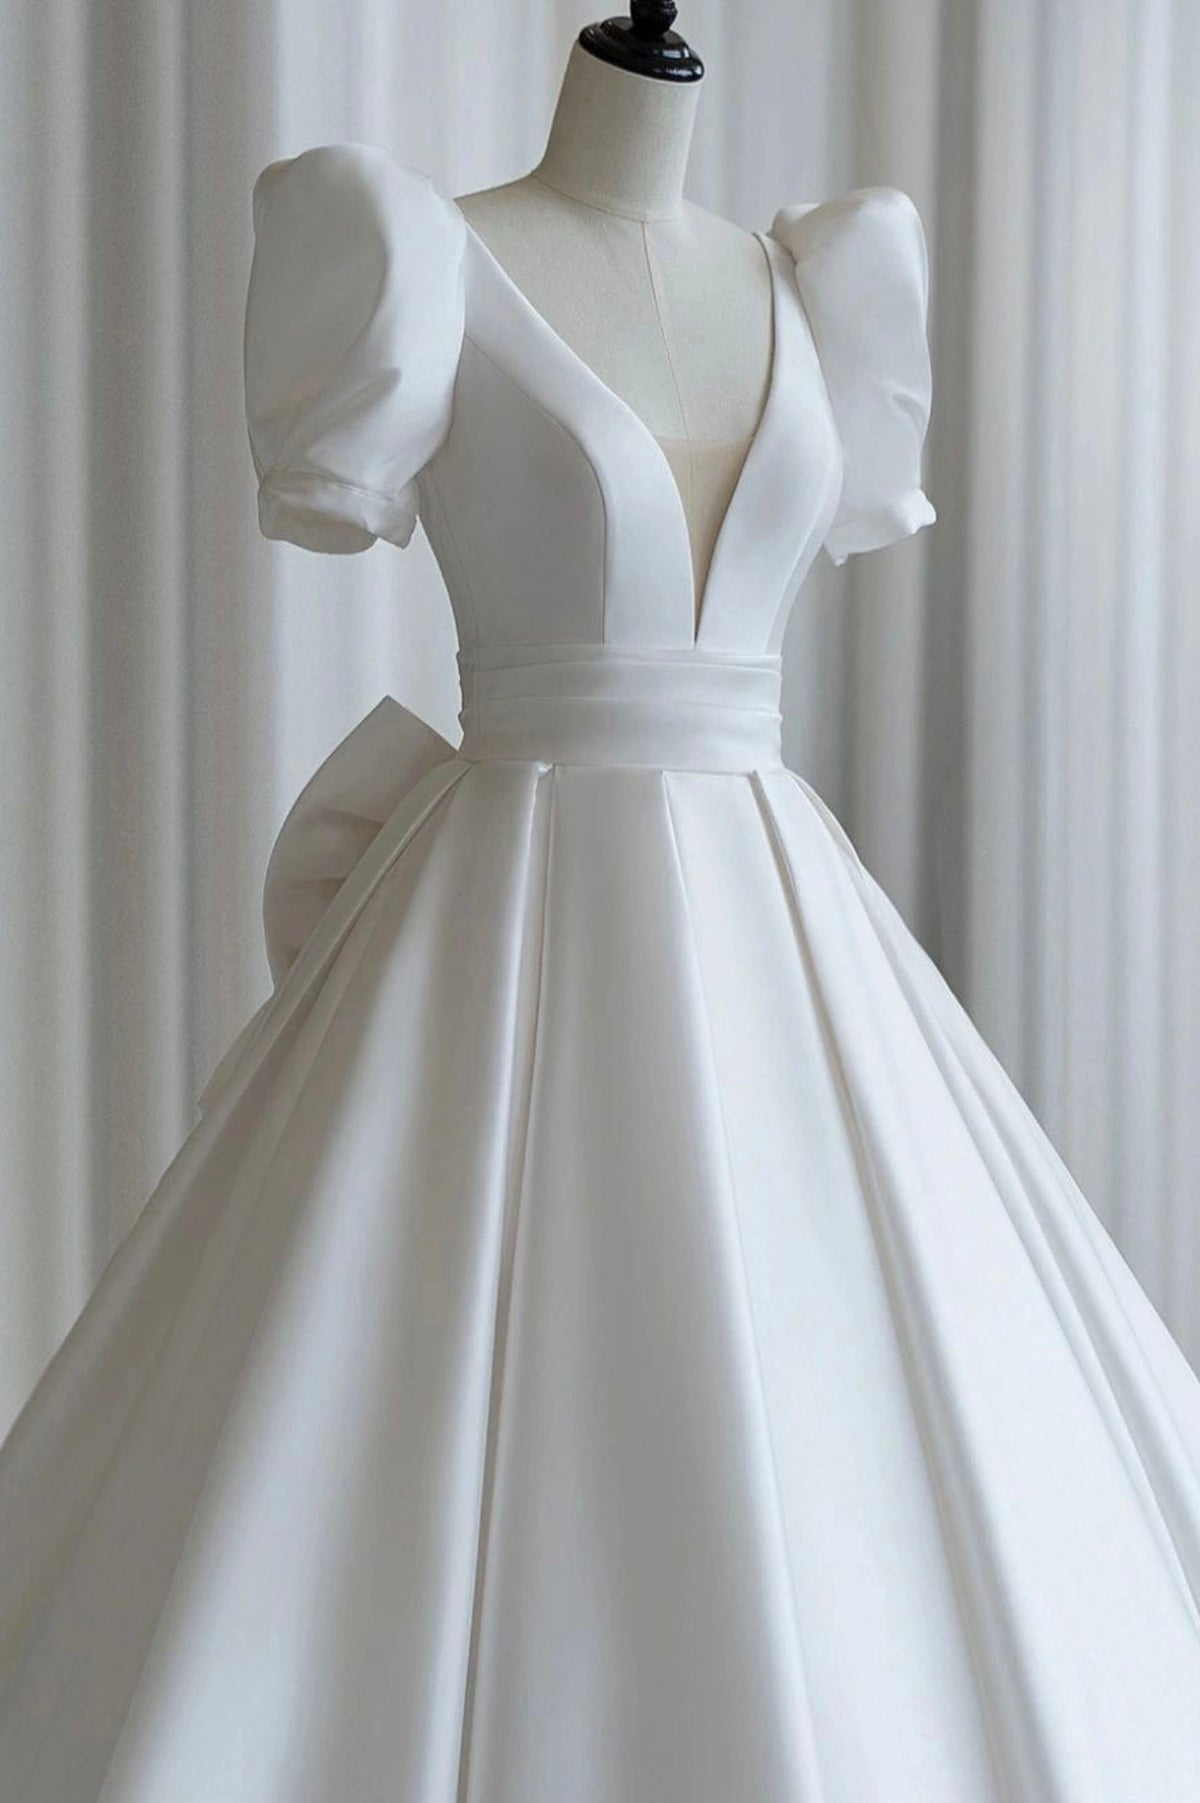 A-Line V-Neck Satin Wedding Dress, White Short Sleeve Bridal Gown with Bow